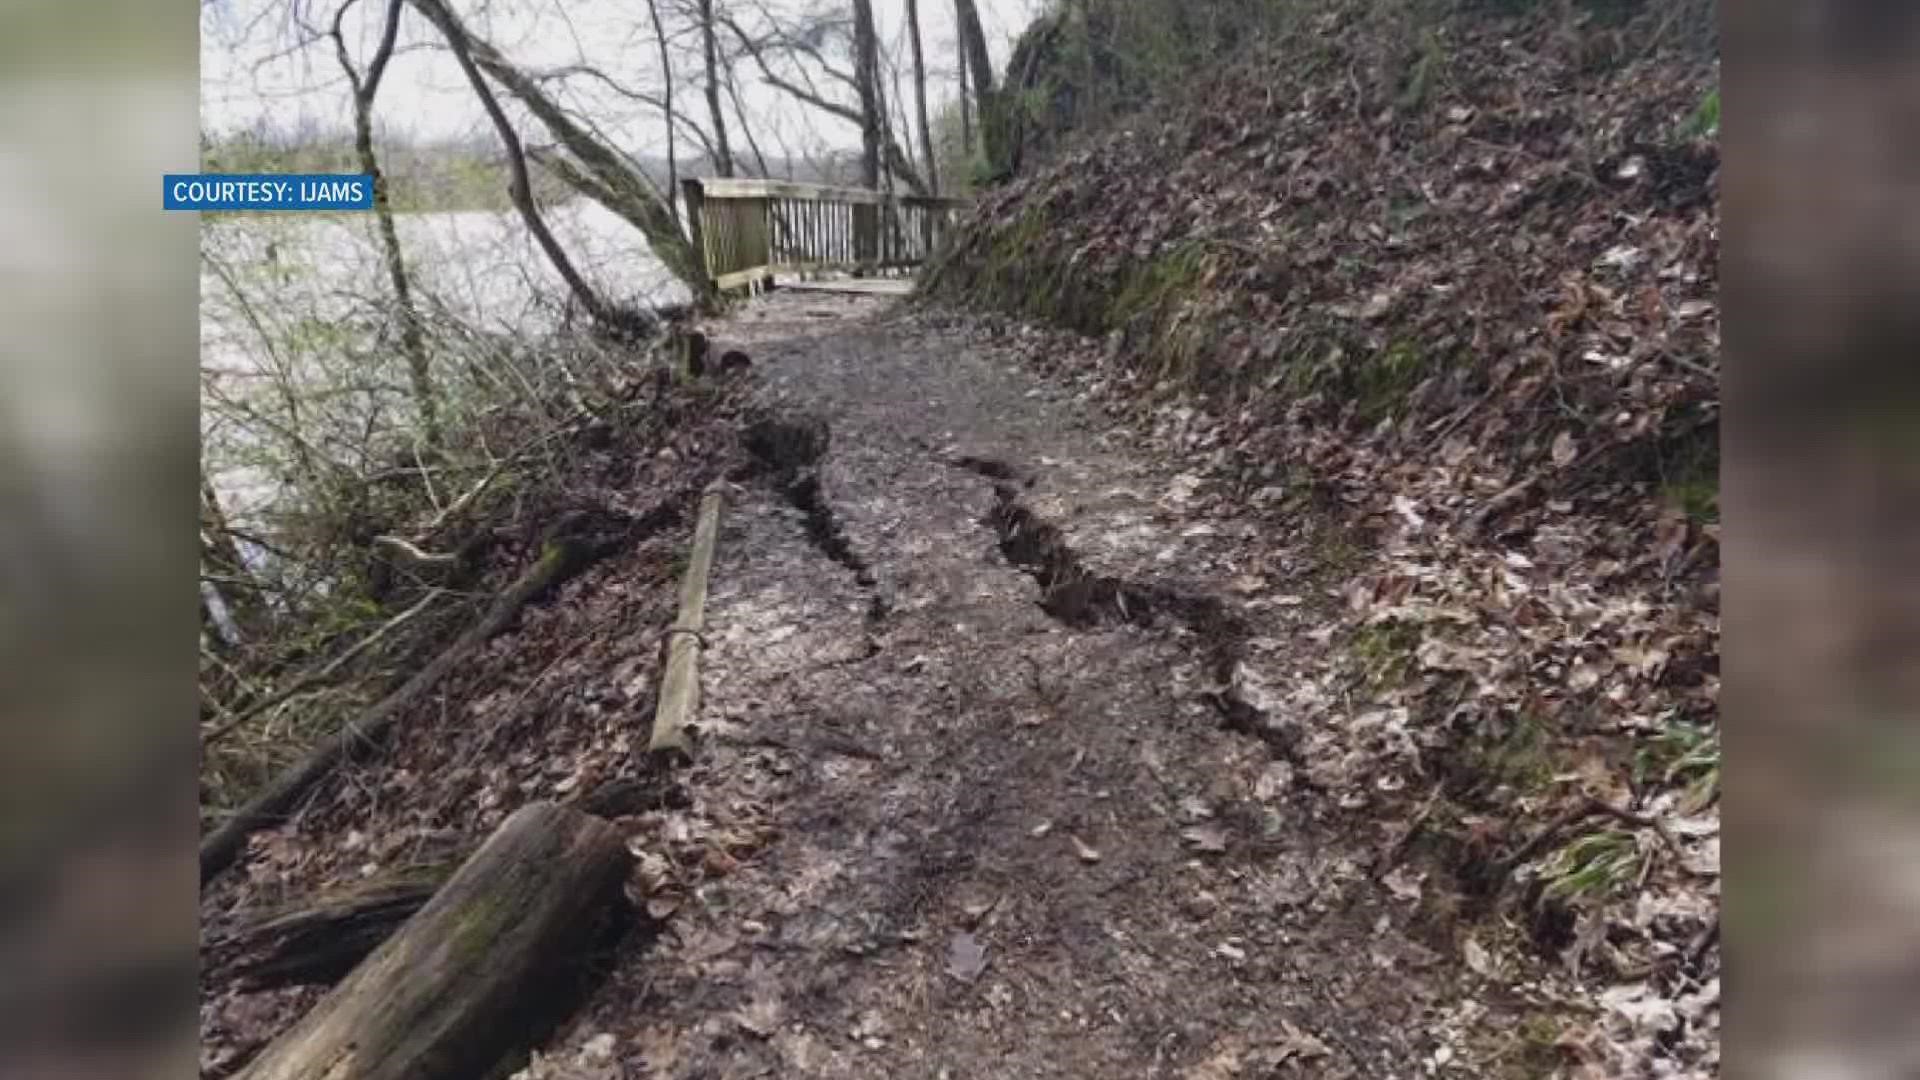 After the trail was damaged from flooding in Feb. 2019, Ijams Nature Center will reopen the north side of the river trail and a new section of the river boardwalk.